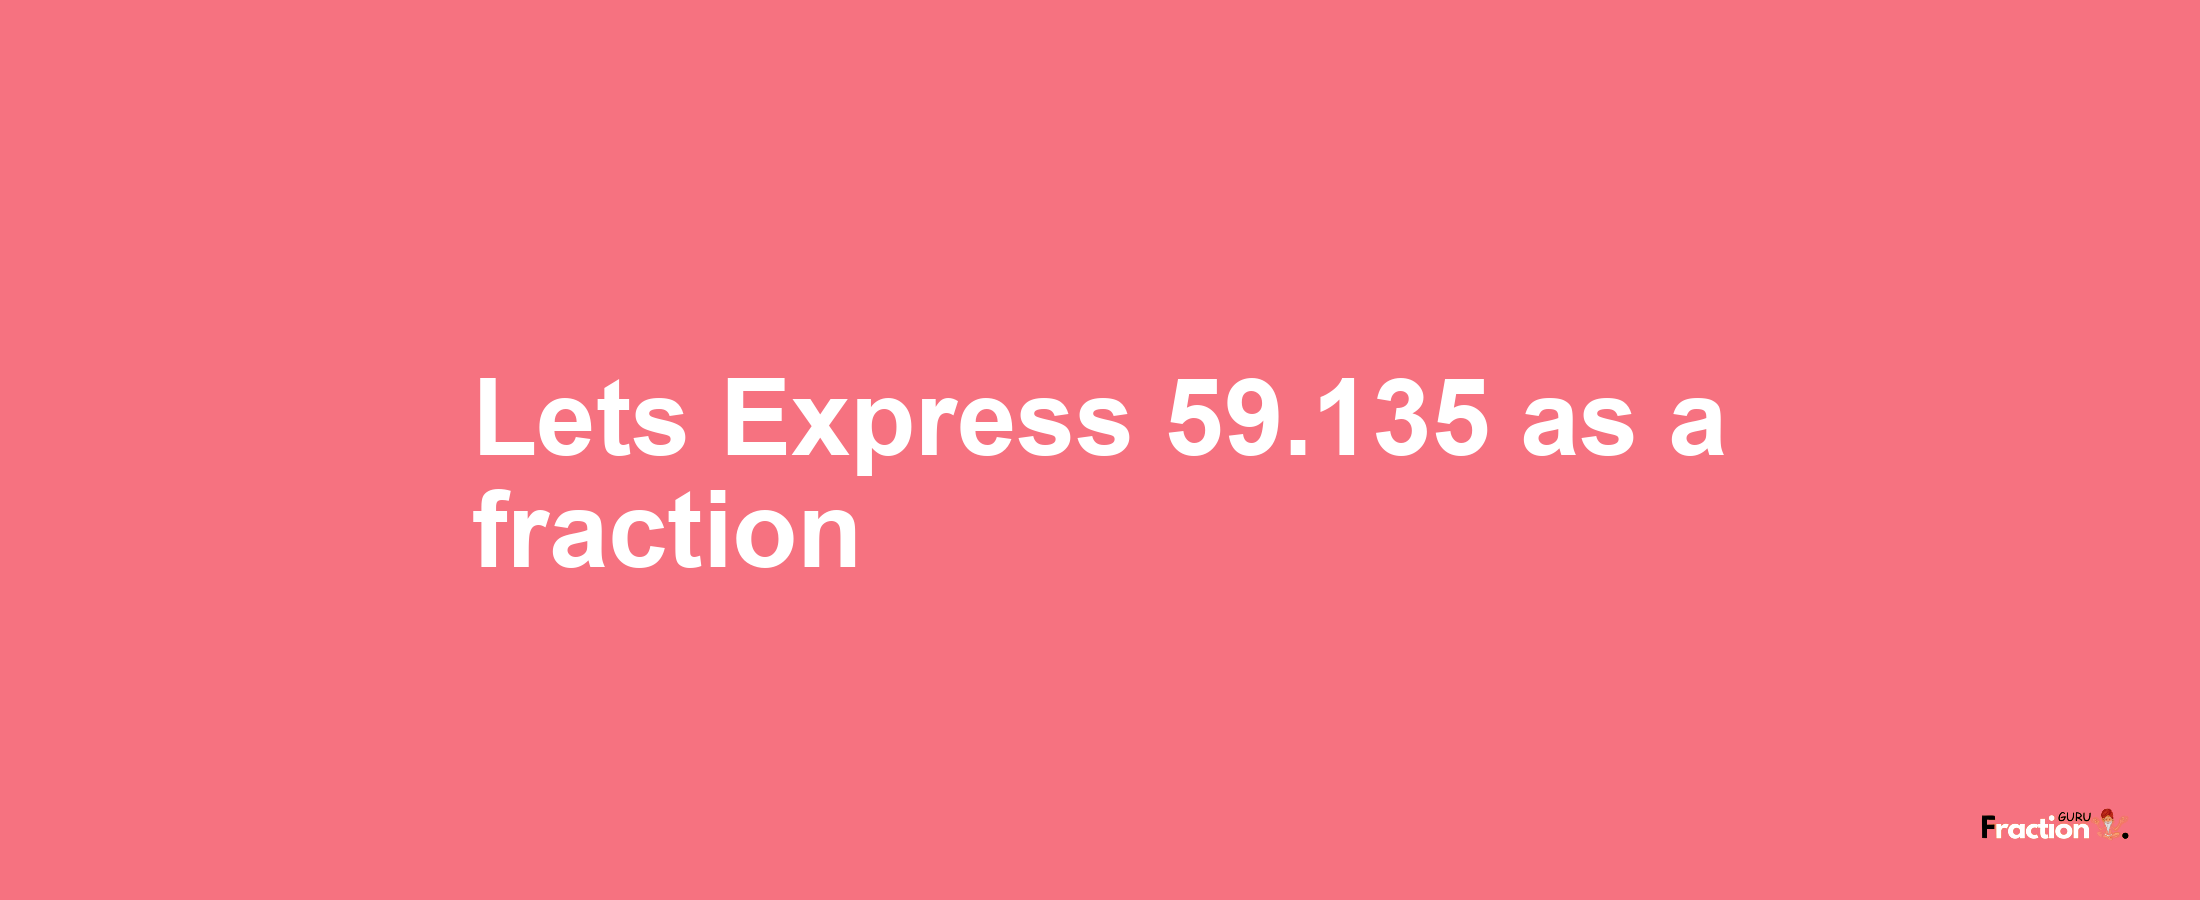 Lets Express 59.135 as afraction